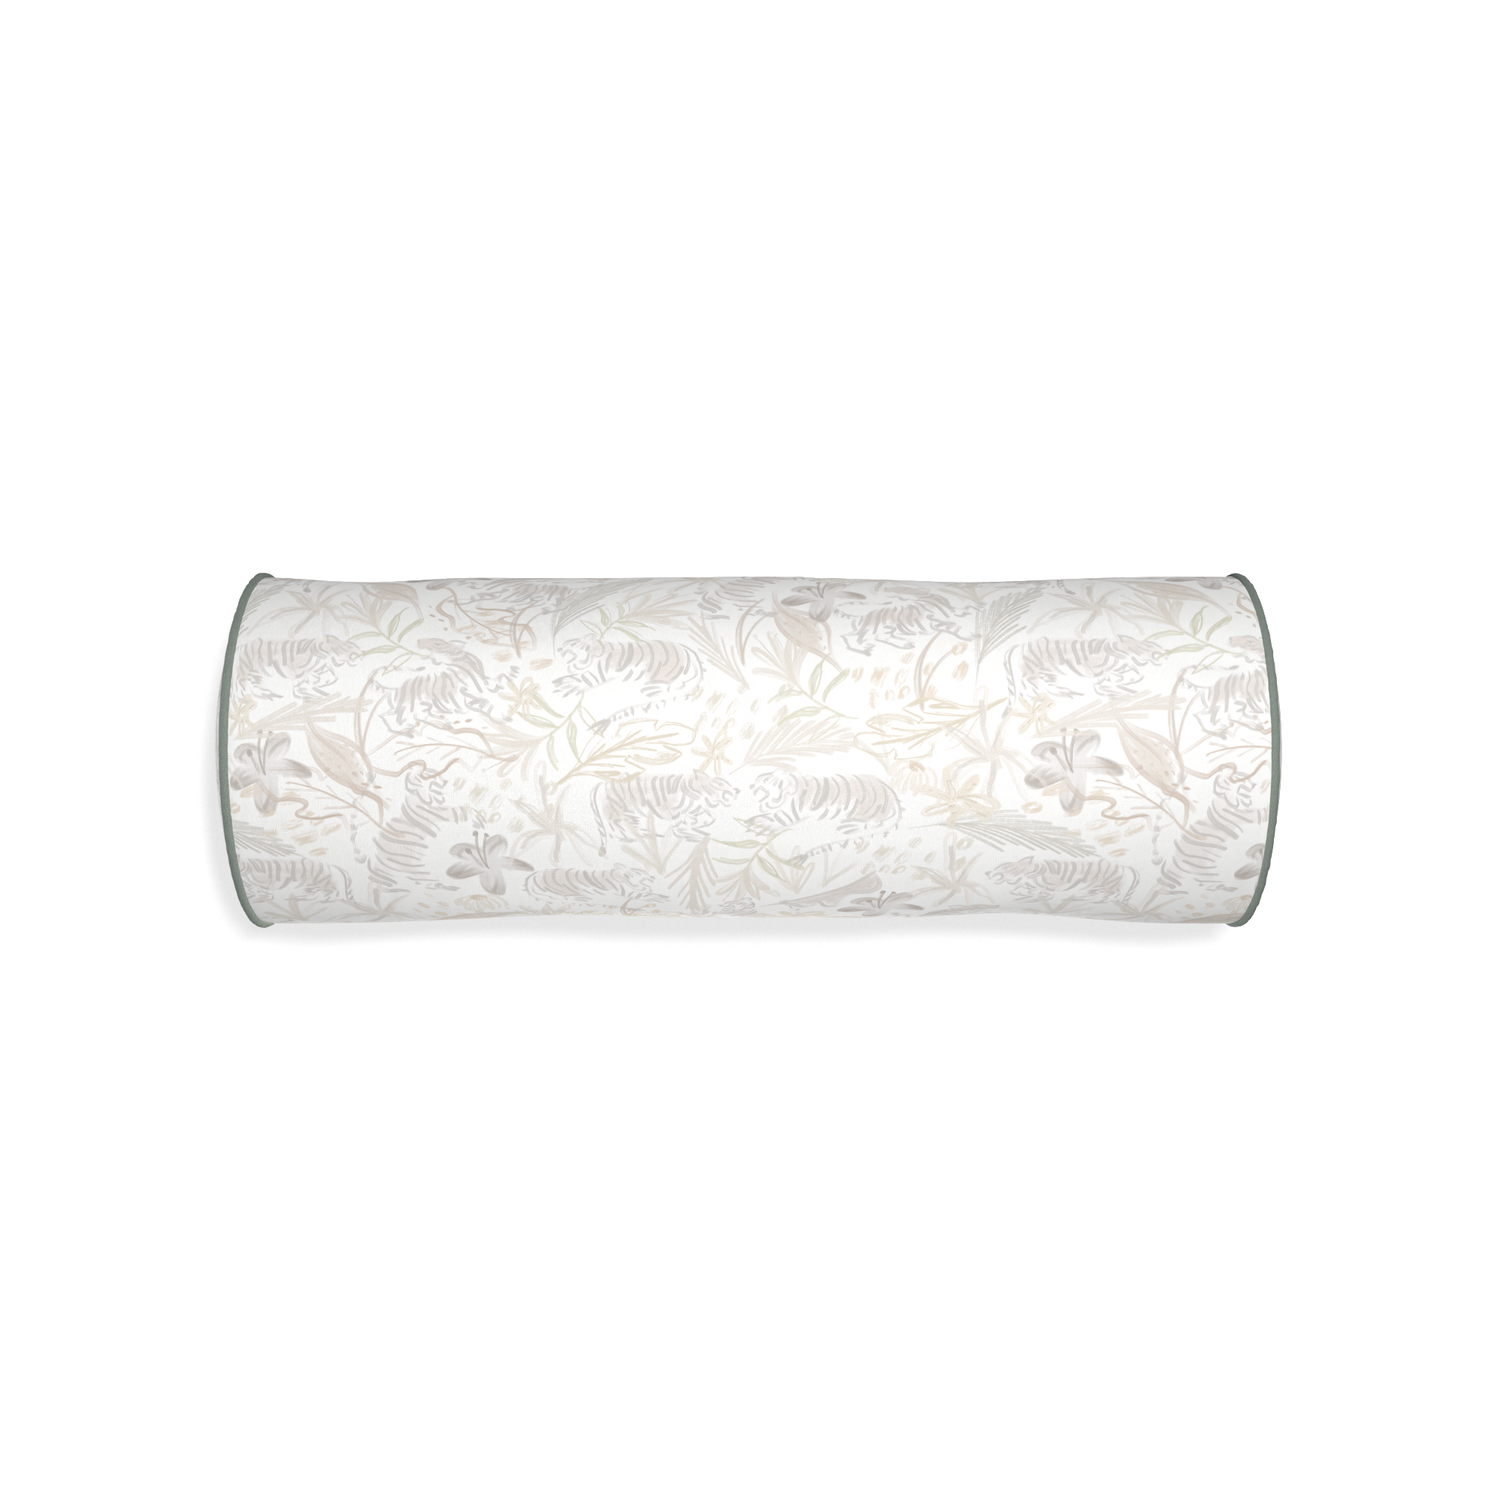 Bolster frida sand custom beige chinoiserie tigerpillow with sage piping on white background